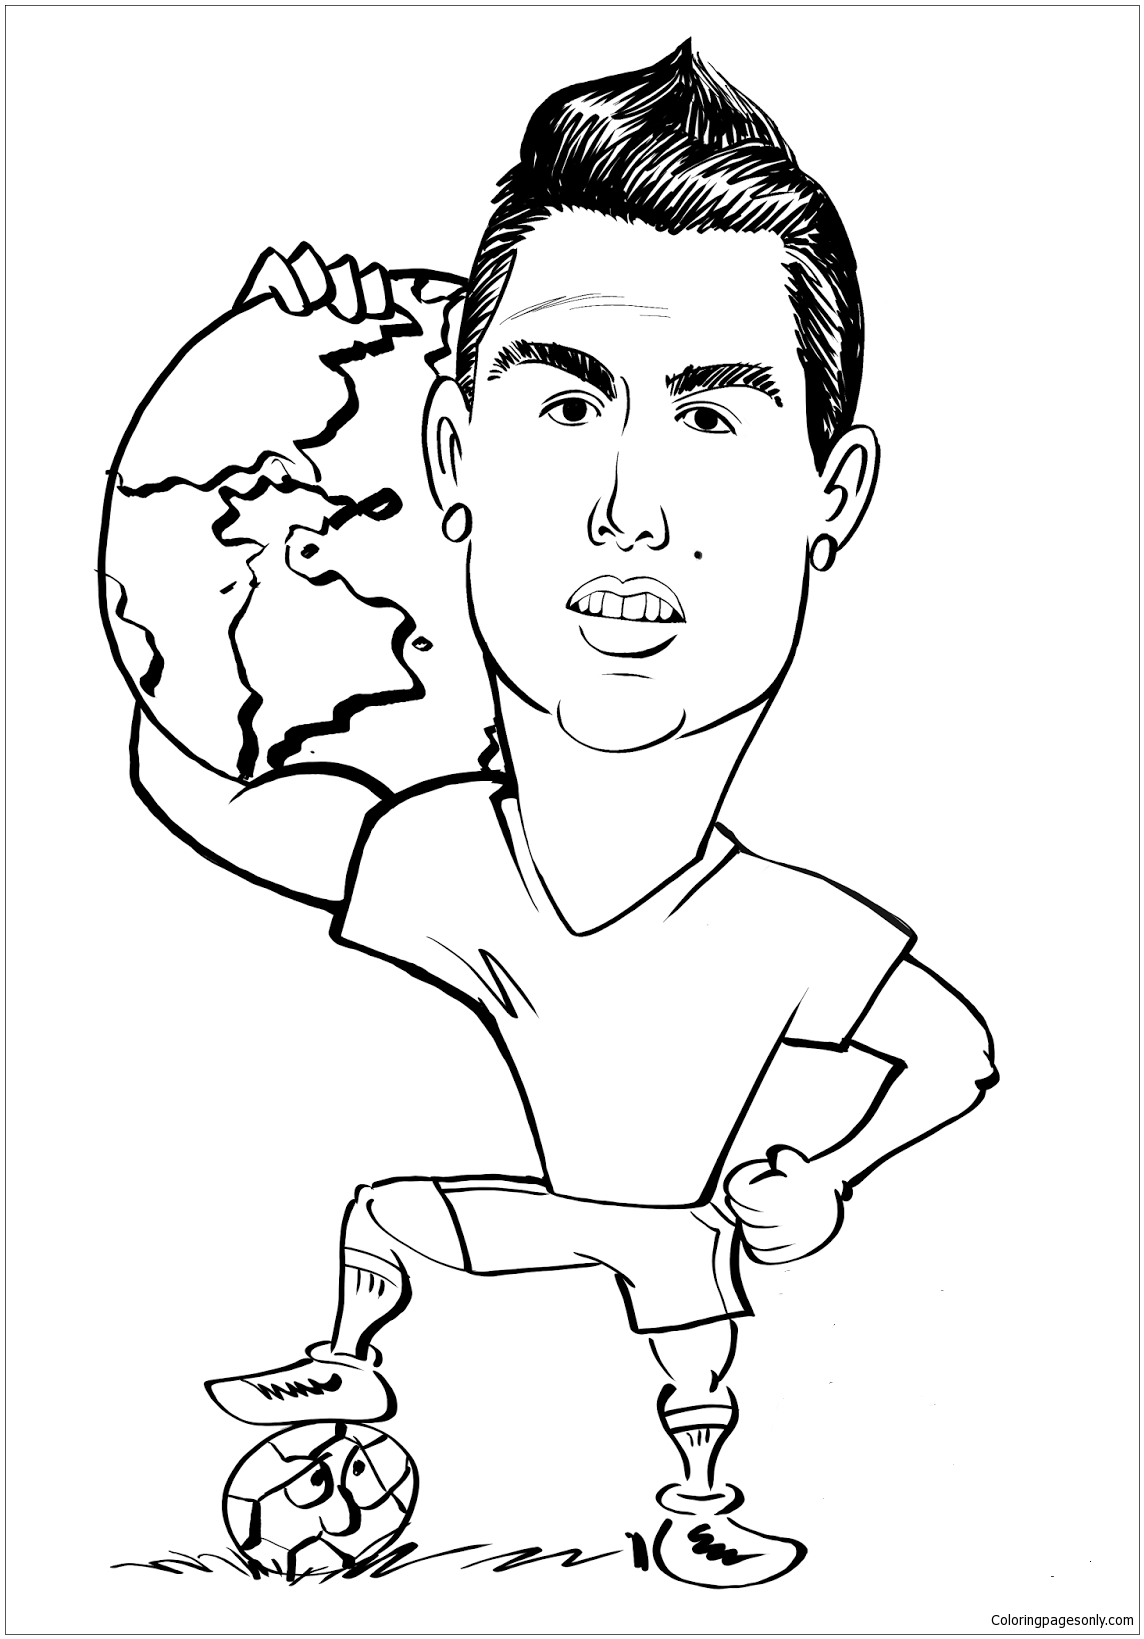 cristiano-ronaldo-coloring-pages-at-free-printable-images-and-photos